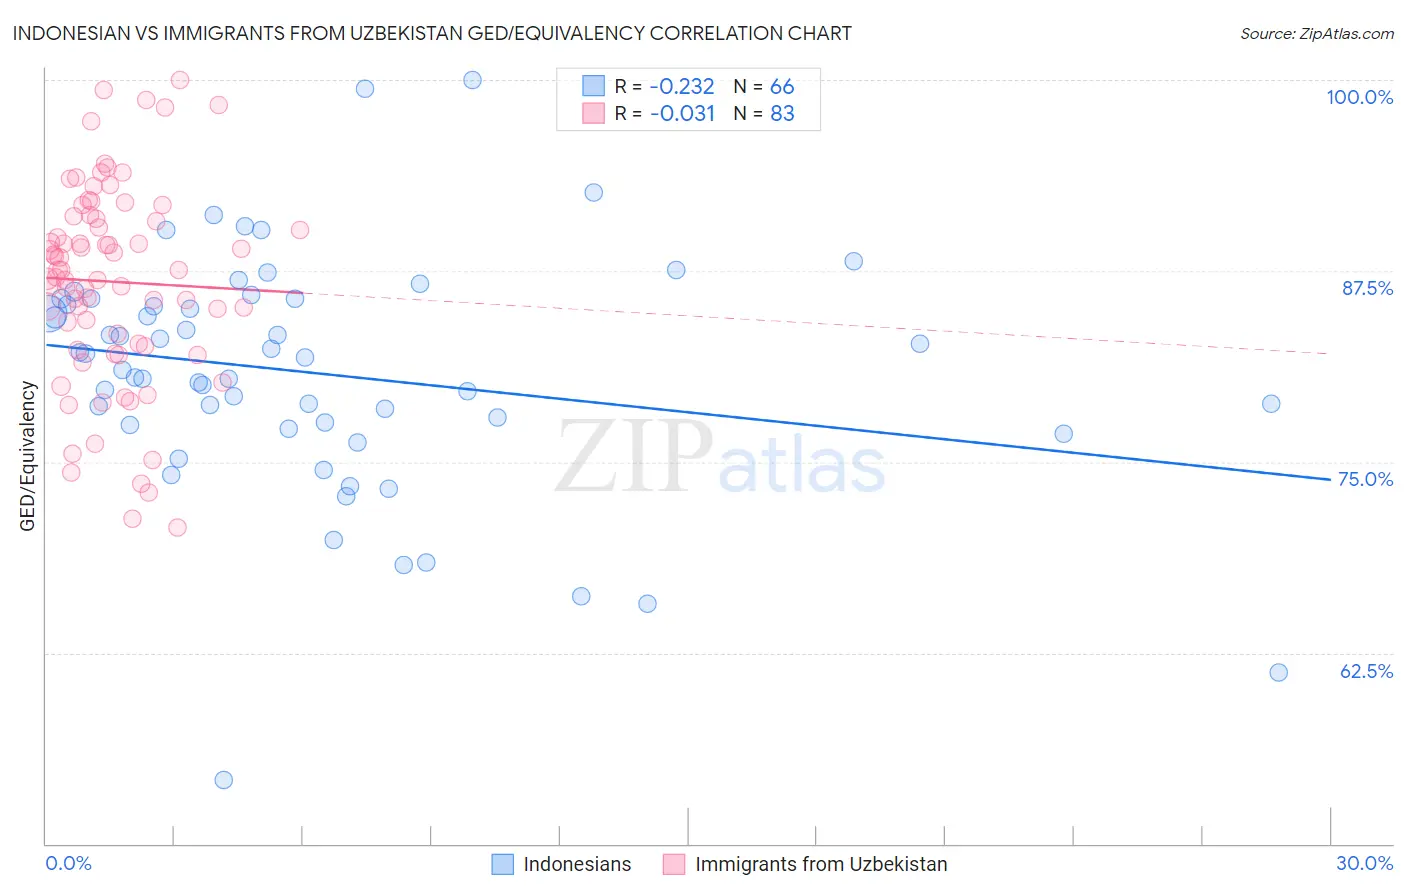 Indonesian vs Immigrants from Uzbekistan GED/Equivalency